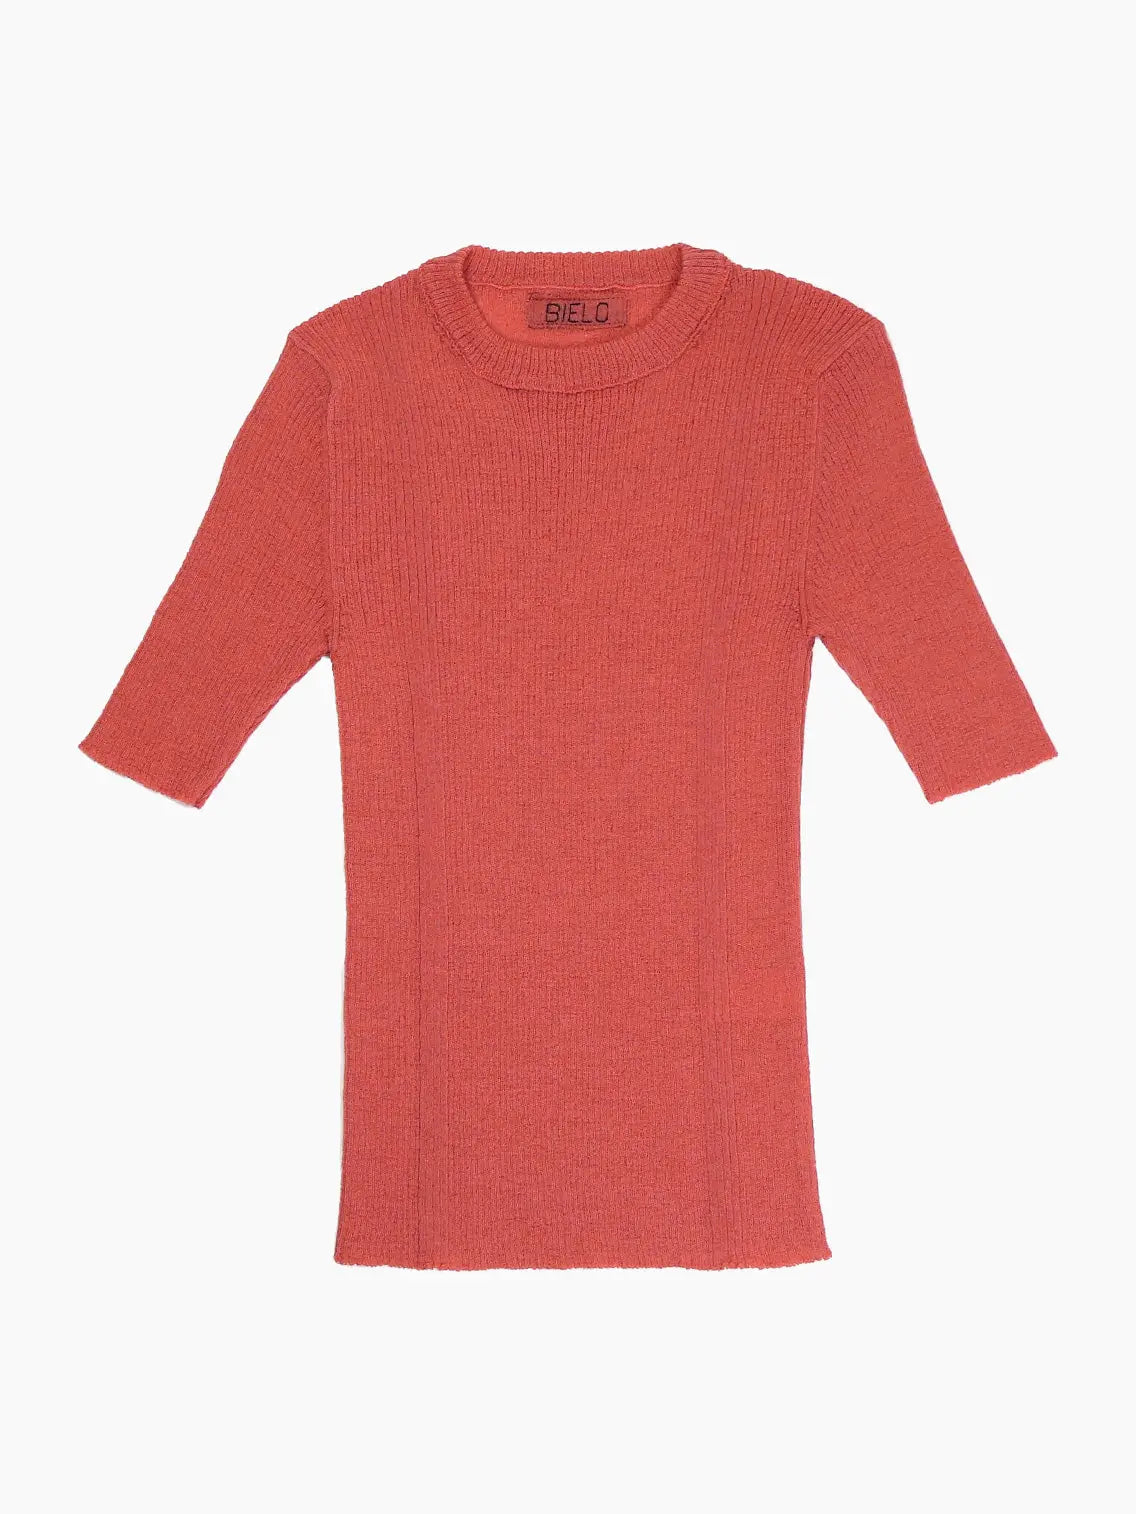 A ribbed, rust-colored knit sweater with half sleeves and a round neckline. The sweater appears flat against a white background, showcasing its texture and simple design. The label "Bielo" is visible on the inside of the neckline. Available at Bassalstore in Barcelona as the Masho Coral.